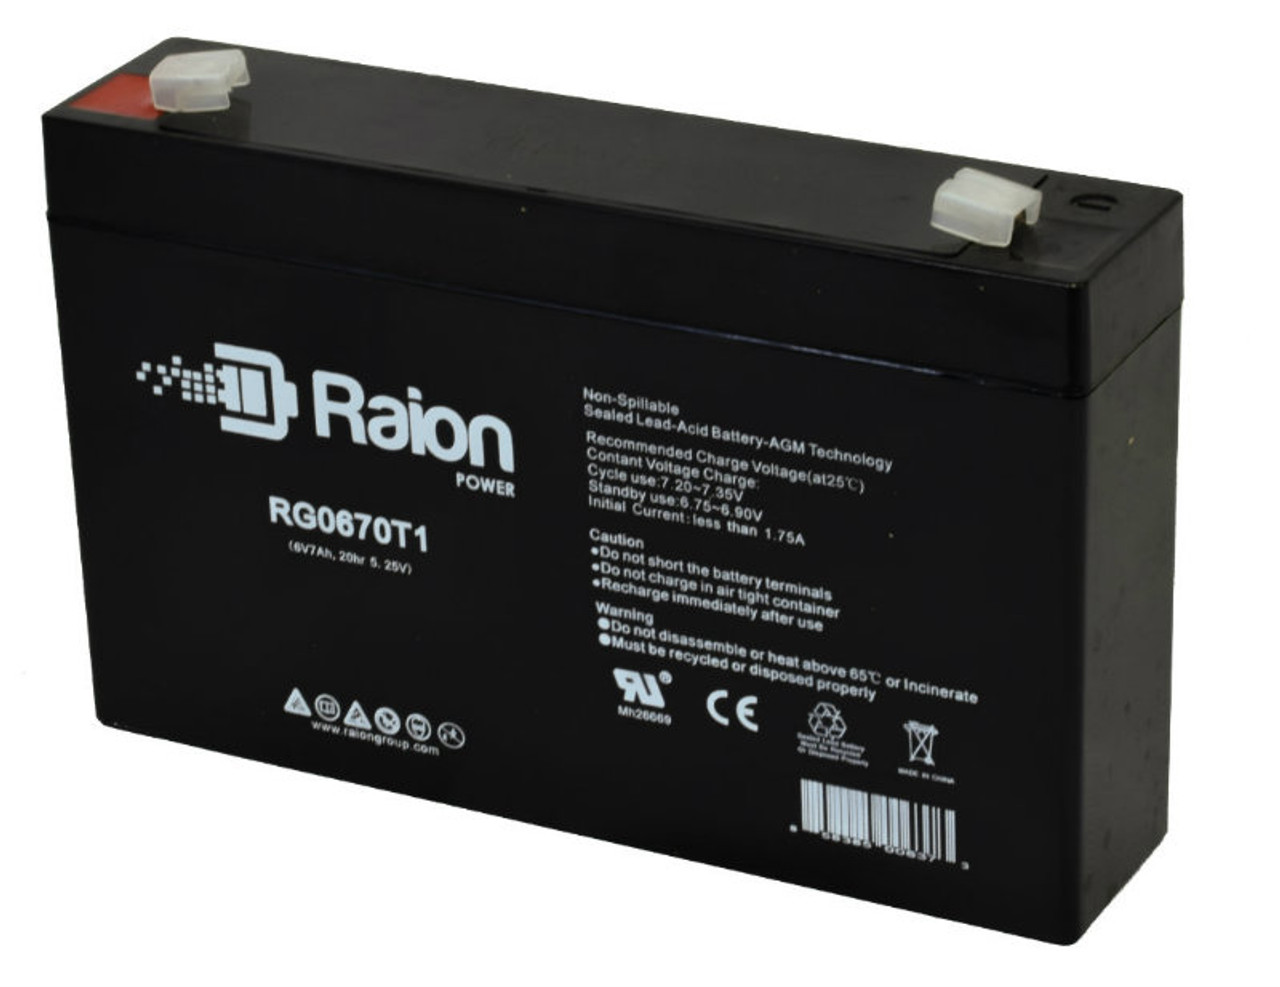 Raion Power RG0670T1 Replacement Battery for Johnson Controls GC645 OEM Battery